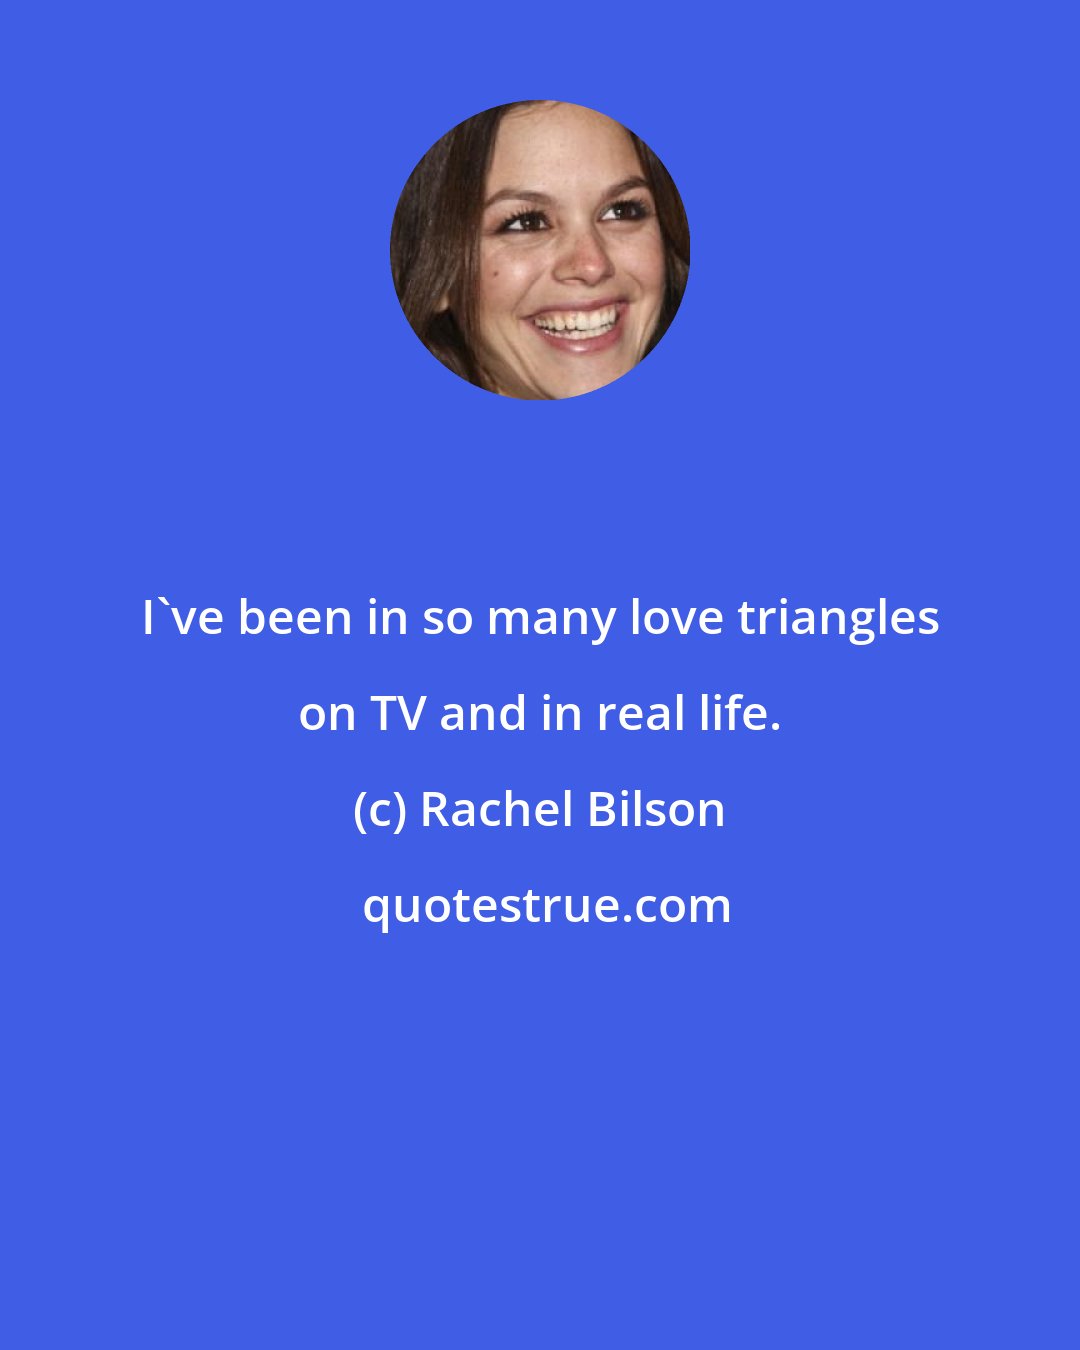 Rachel Bilson: I've been in so many love triangles on TV and in real life.